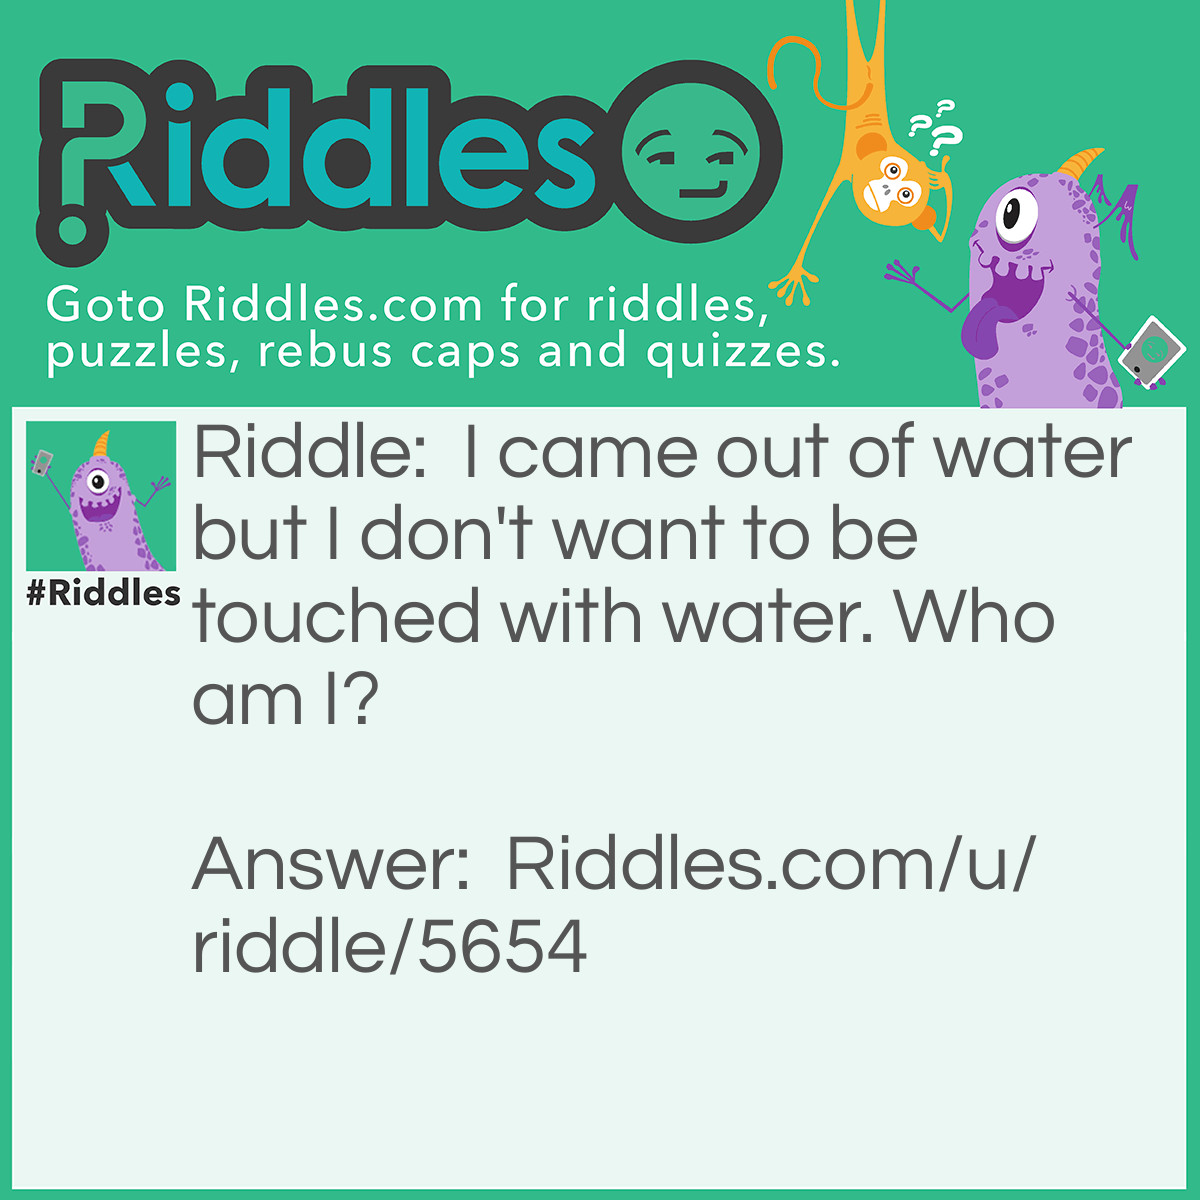 Riddle: I came out of water but I don't want to be touched with water. Who am I? Answer: Electricity.